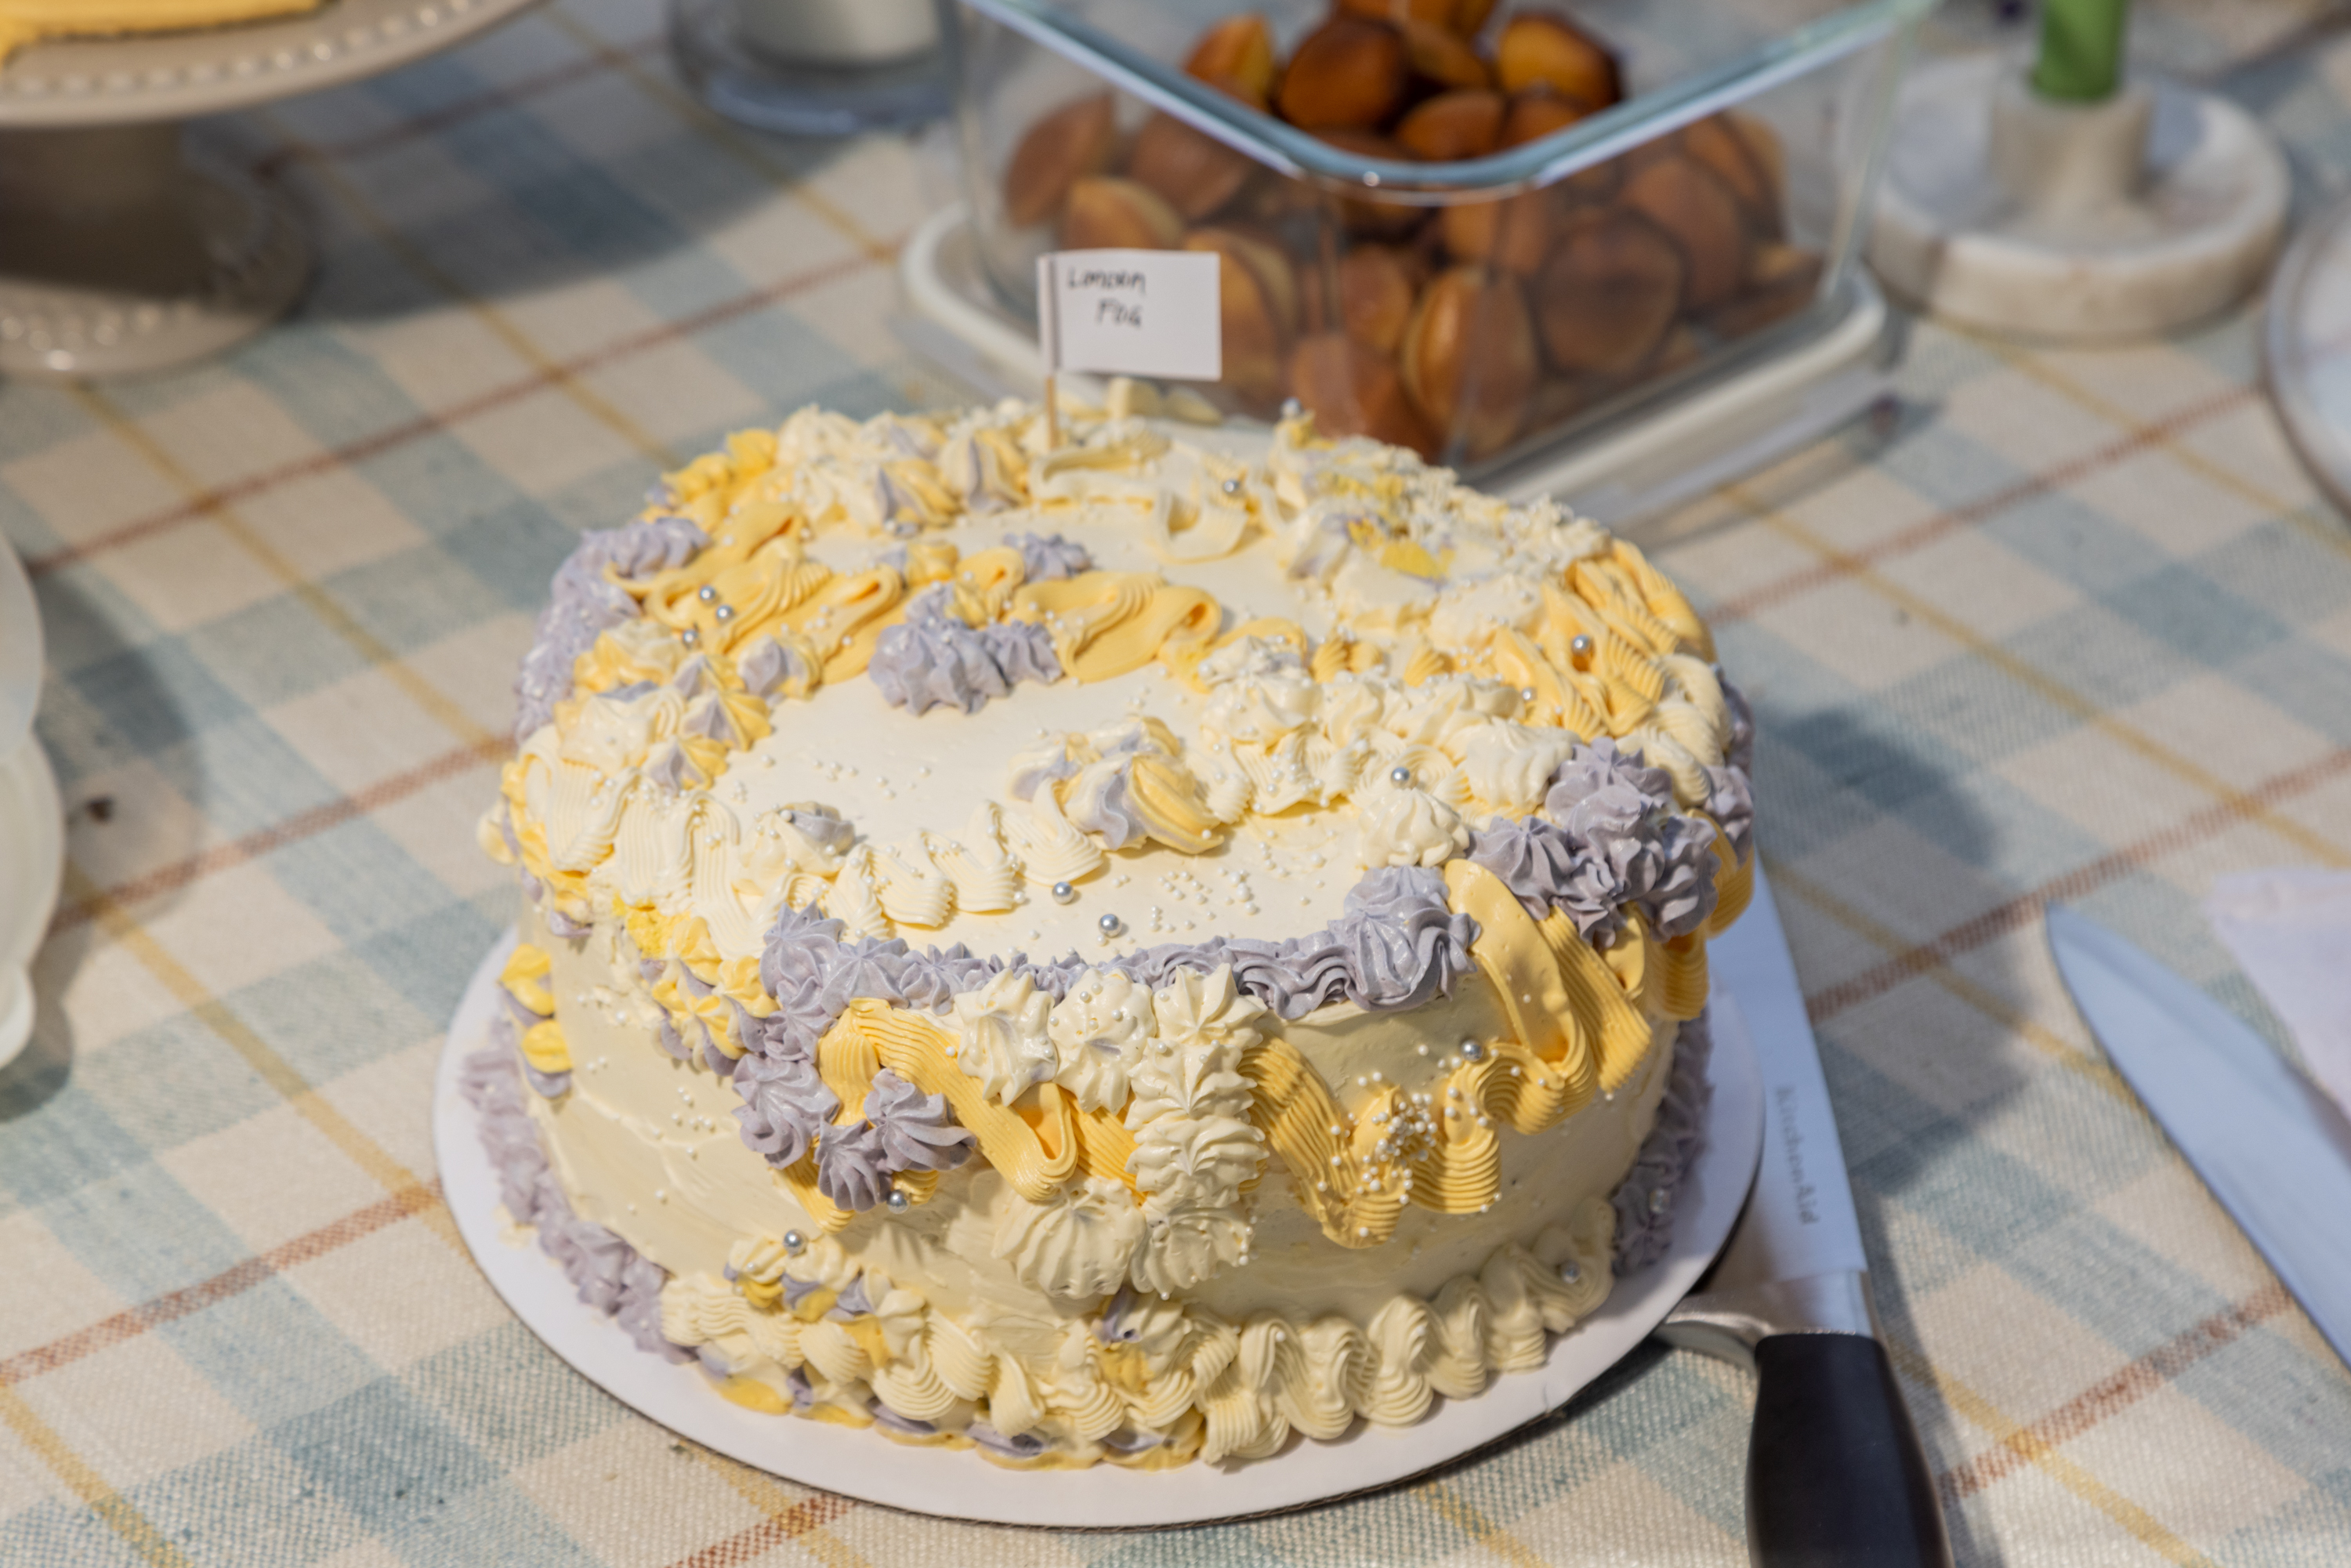 A cake with yellow and purple frosting on a checkered tablecloth next to a &quot;Lemon Fig&quot; sign.